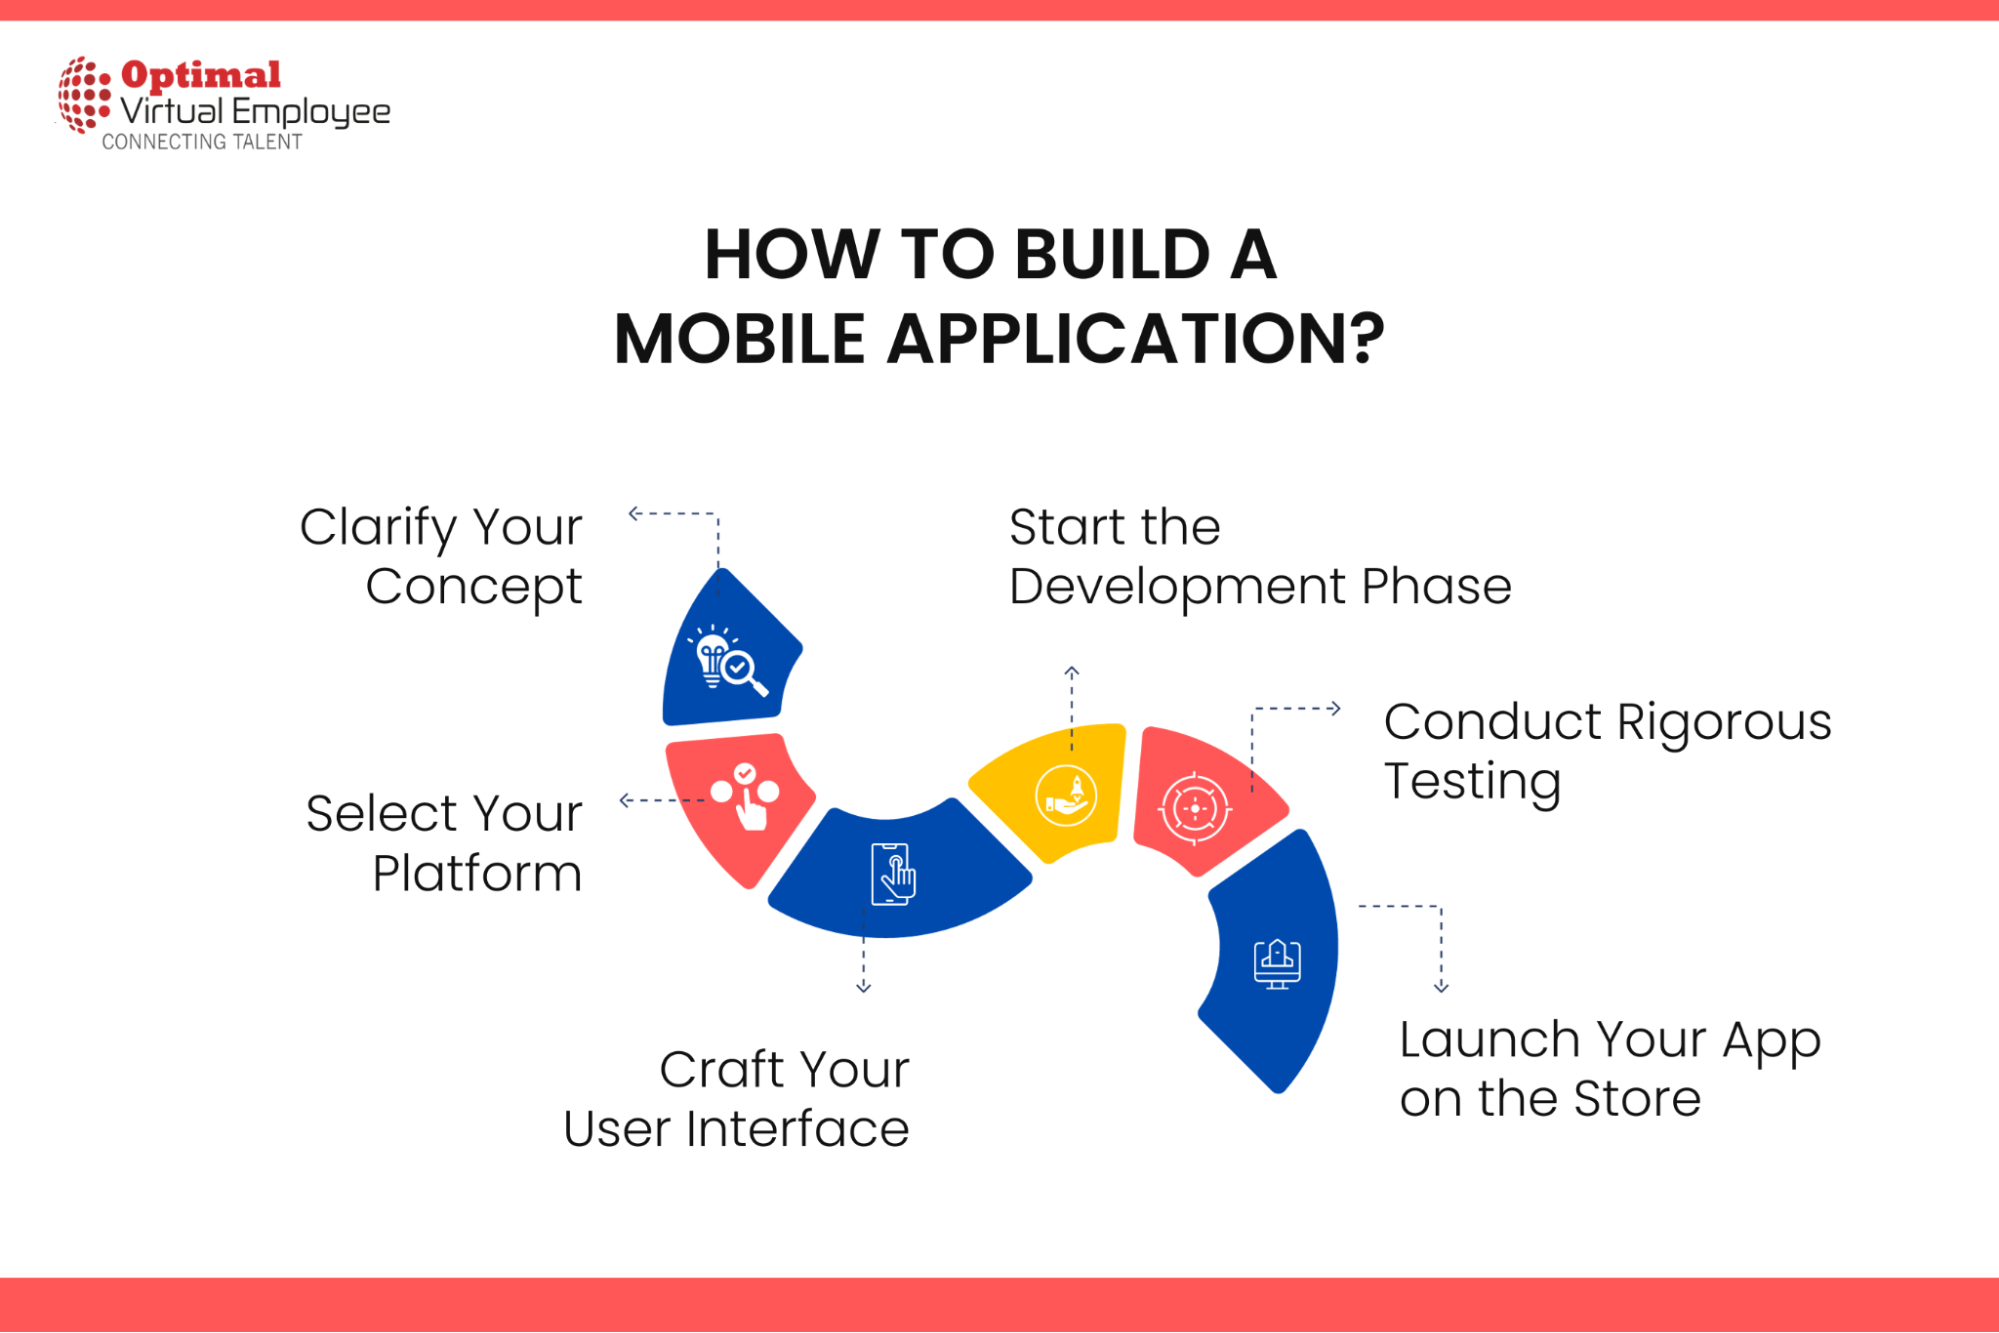 How to build a mobile application